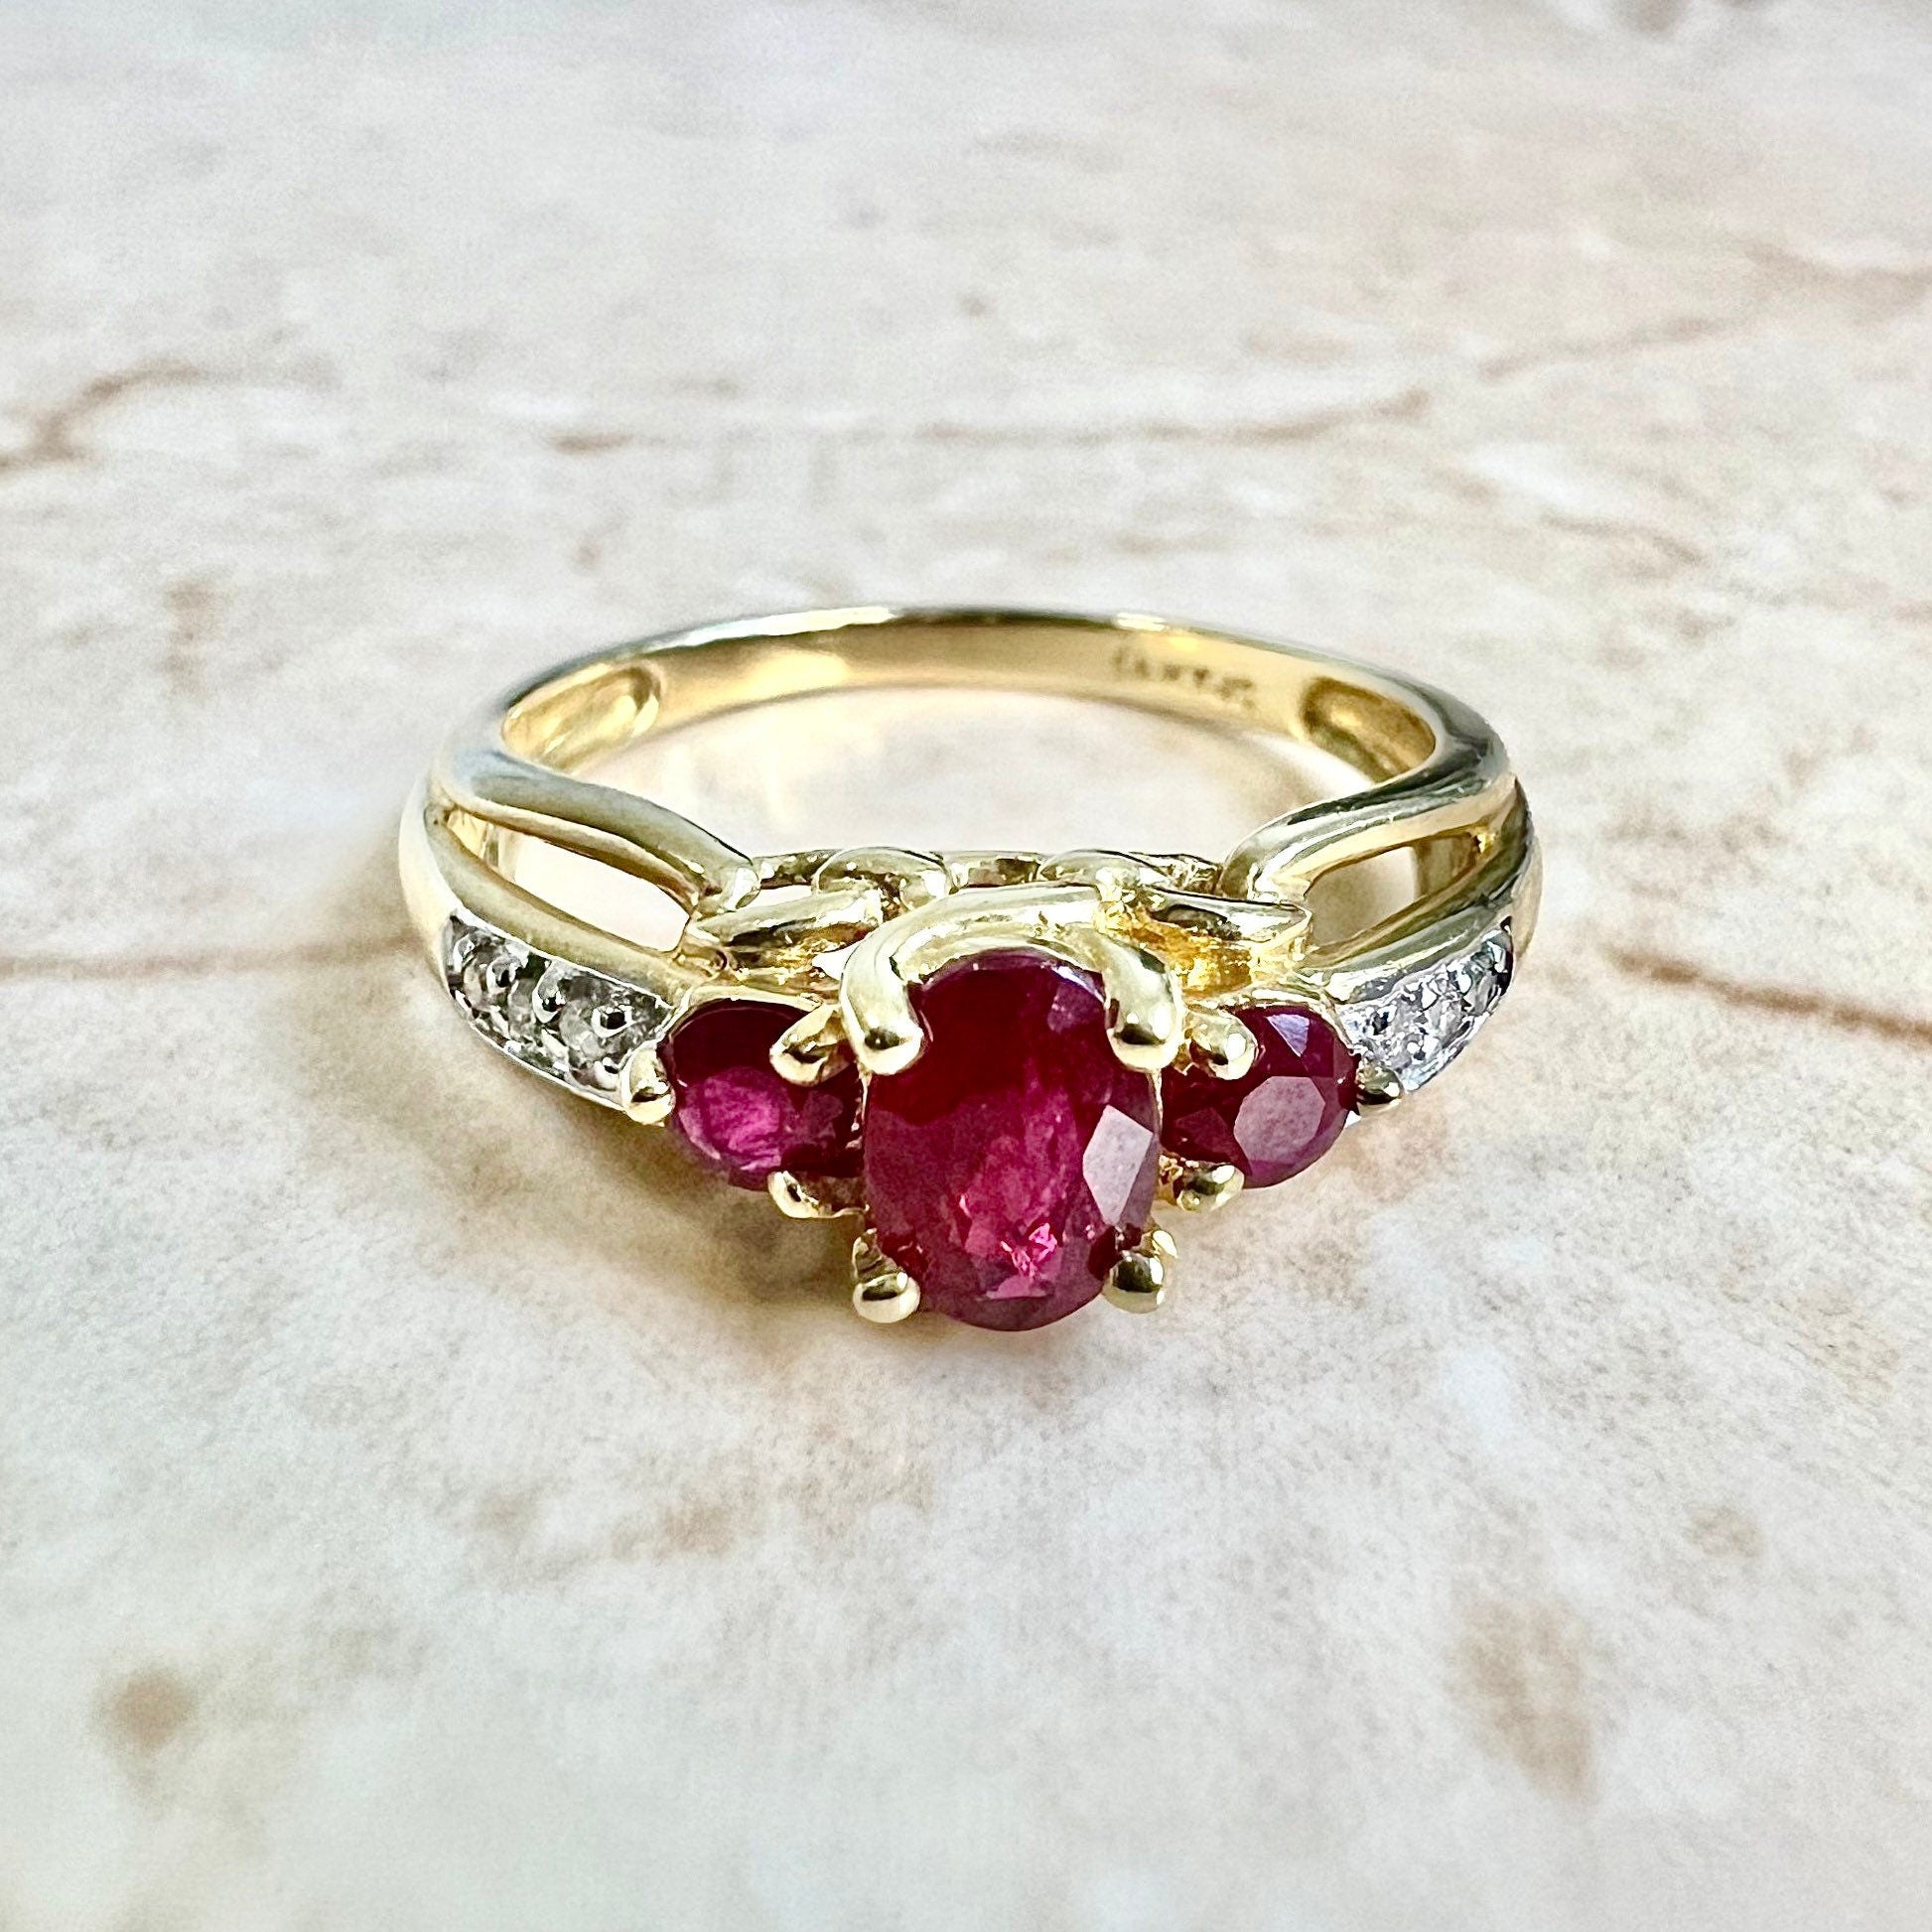 14K 3 Stone Ruby Ring - Yellow Gold Oval Ruby Ring - Natural Ruby Ring - July Birthstone Ring - Ruby Cocktail Ring - 14K Gold 3 Stone Ring